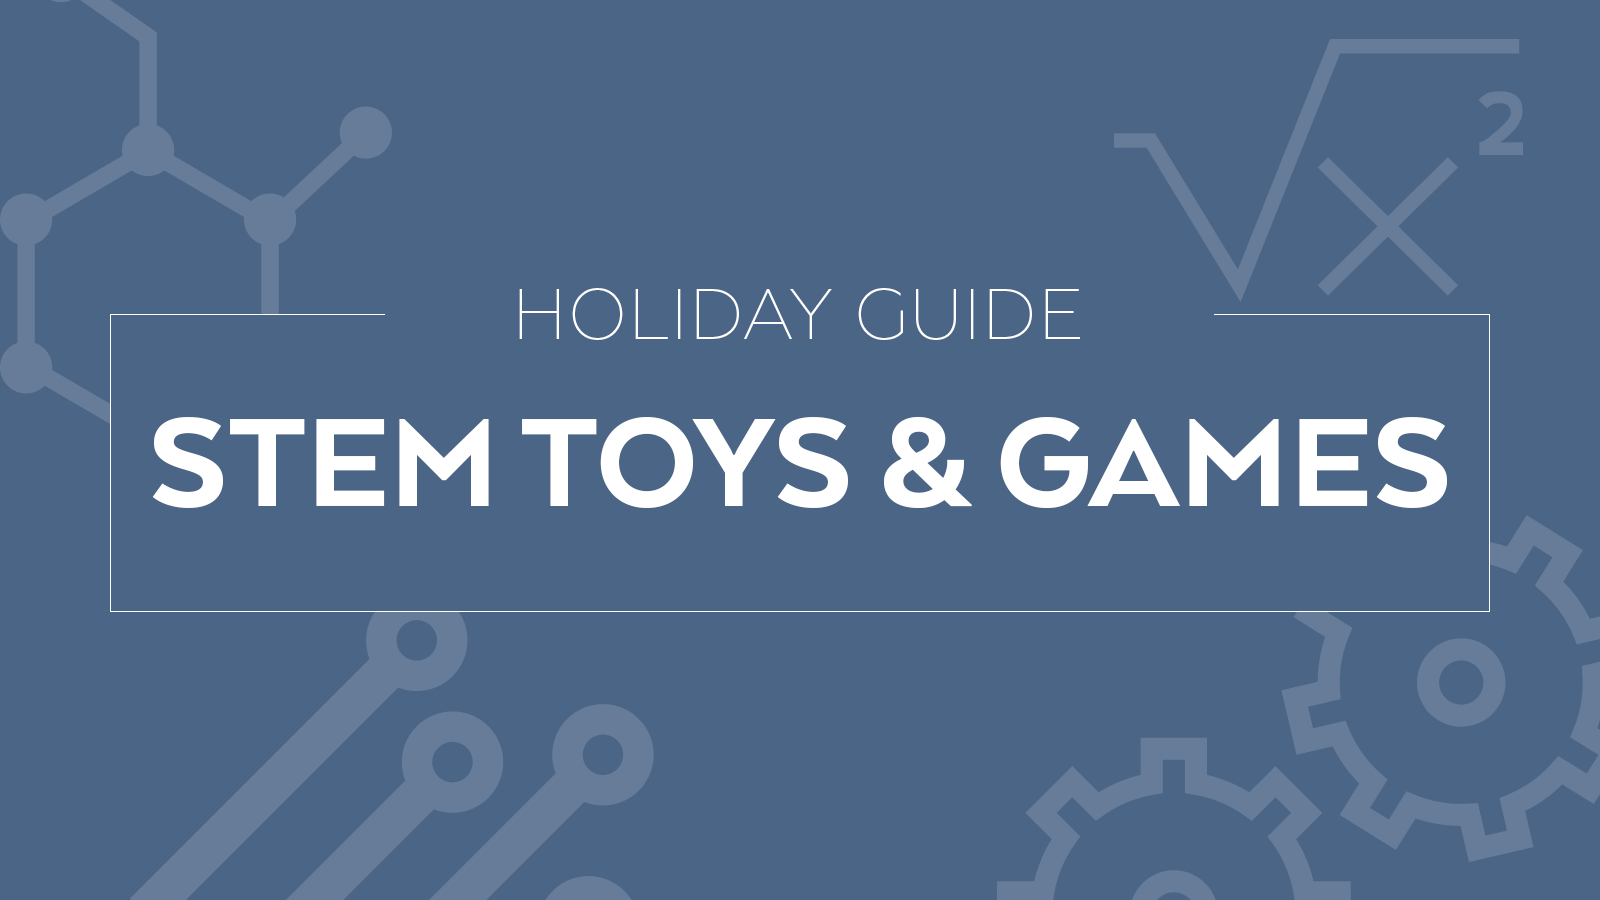 Eureka Software Holiday Guide - STEM Toys and games